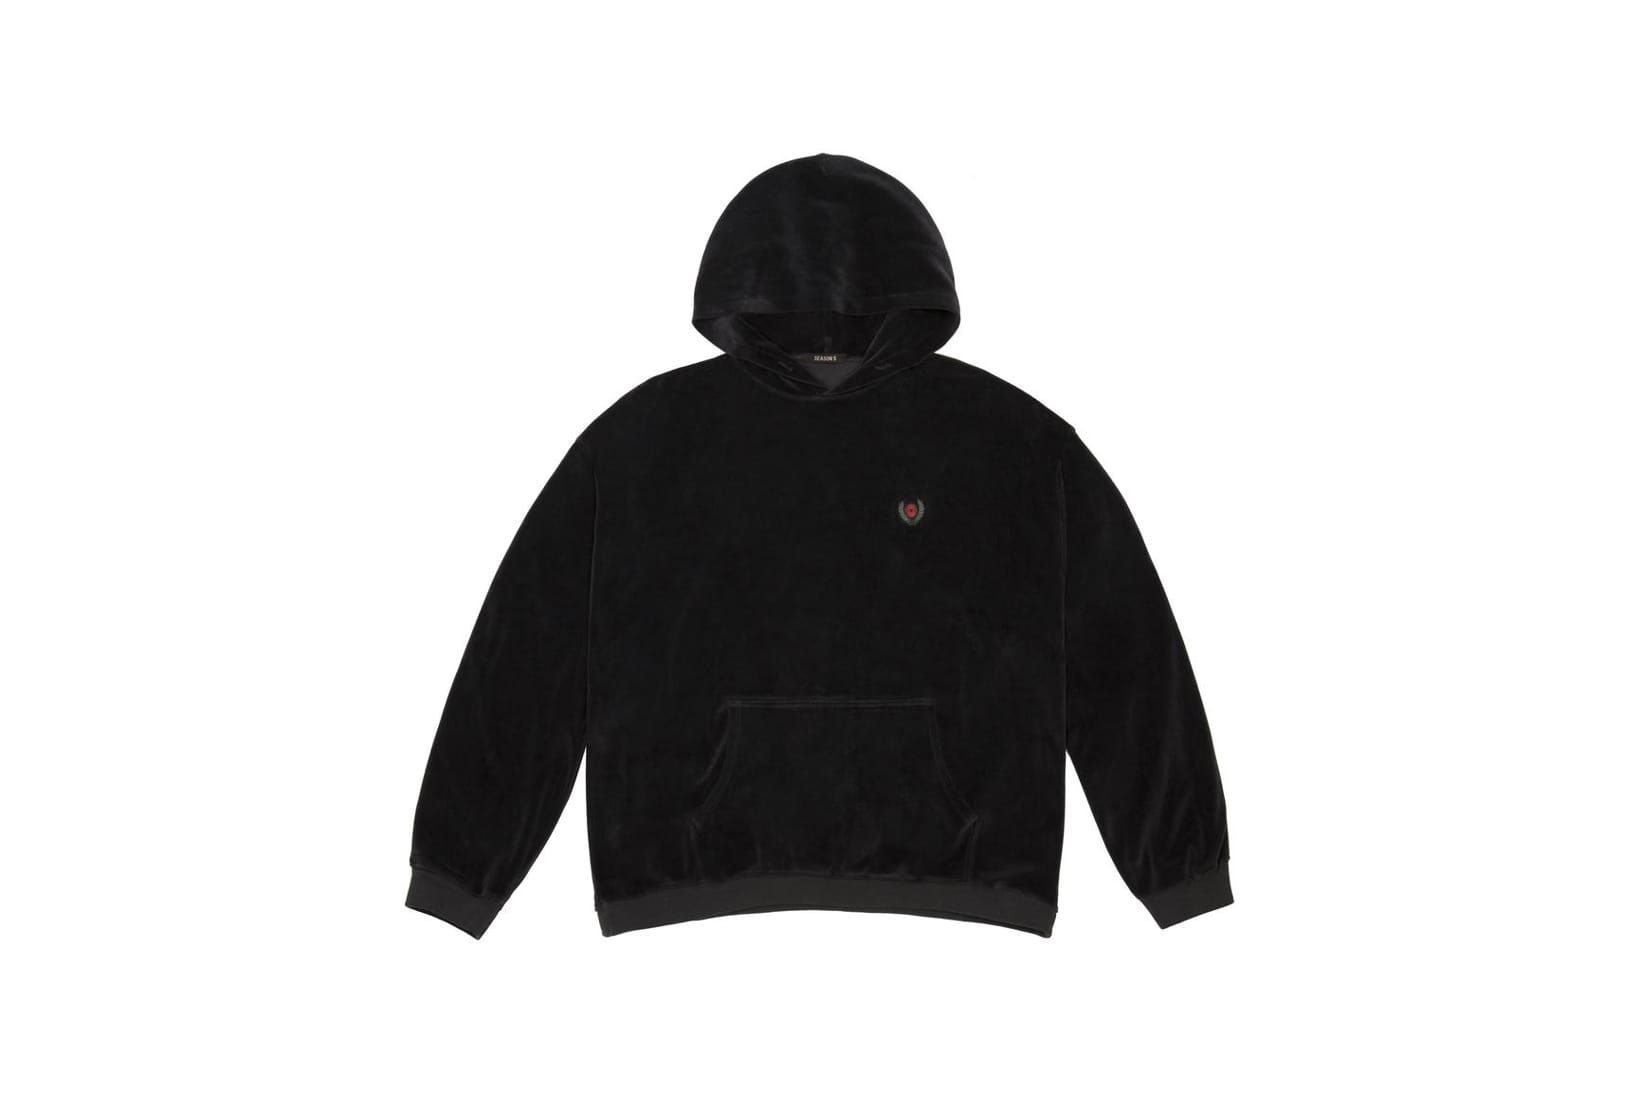 YEEZY Hoodies On Sale at Discounted 